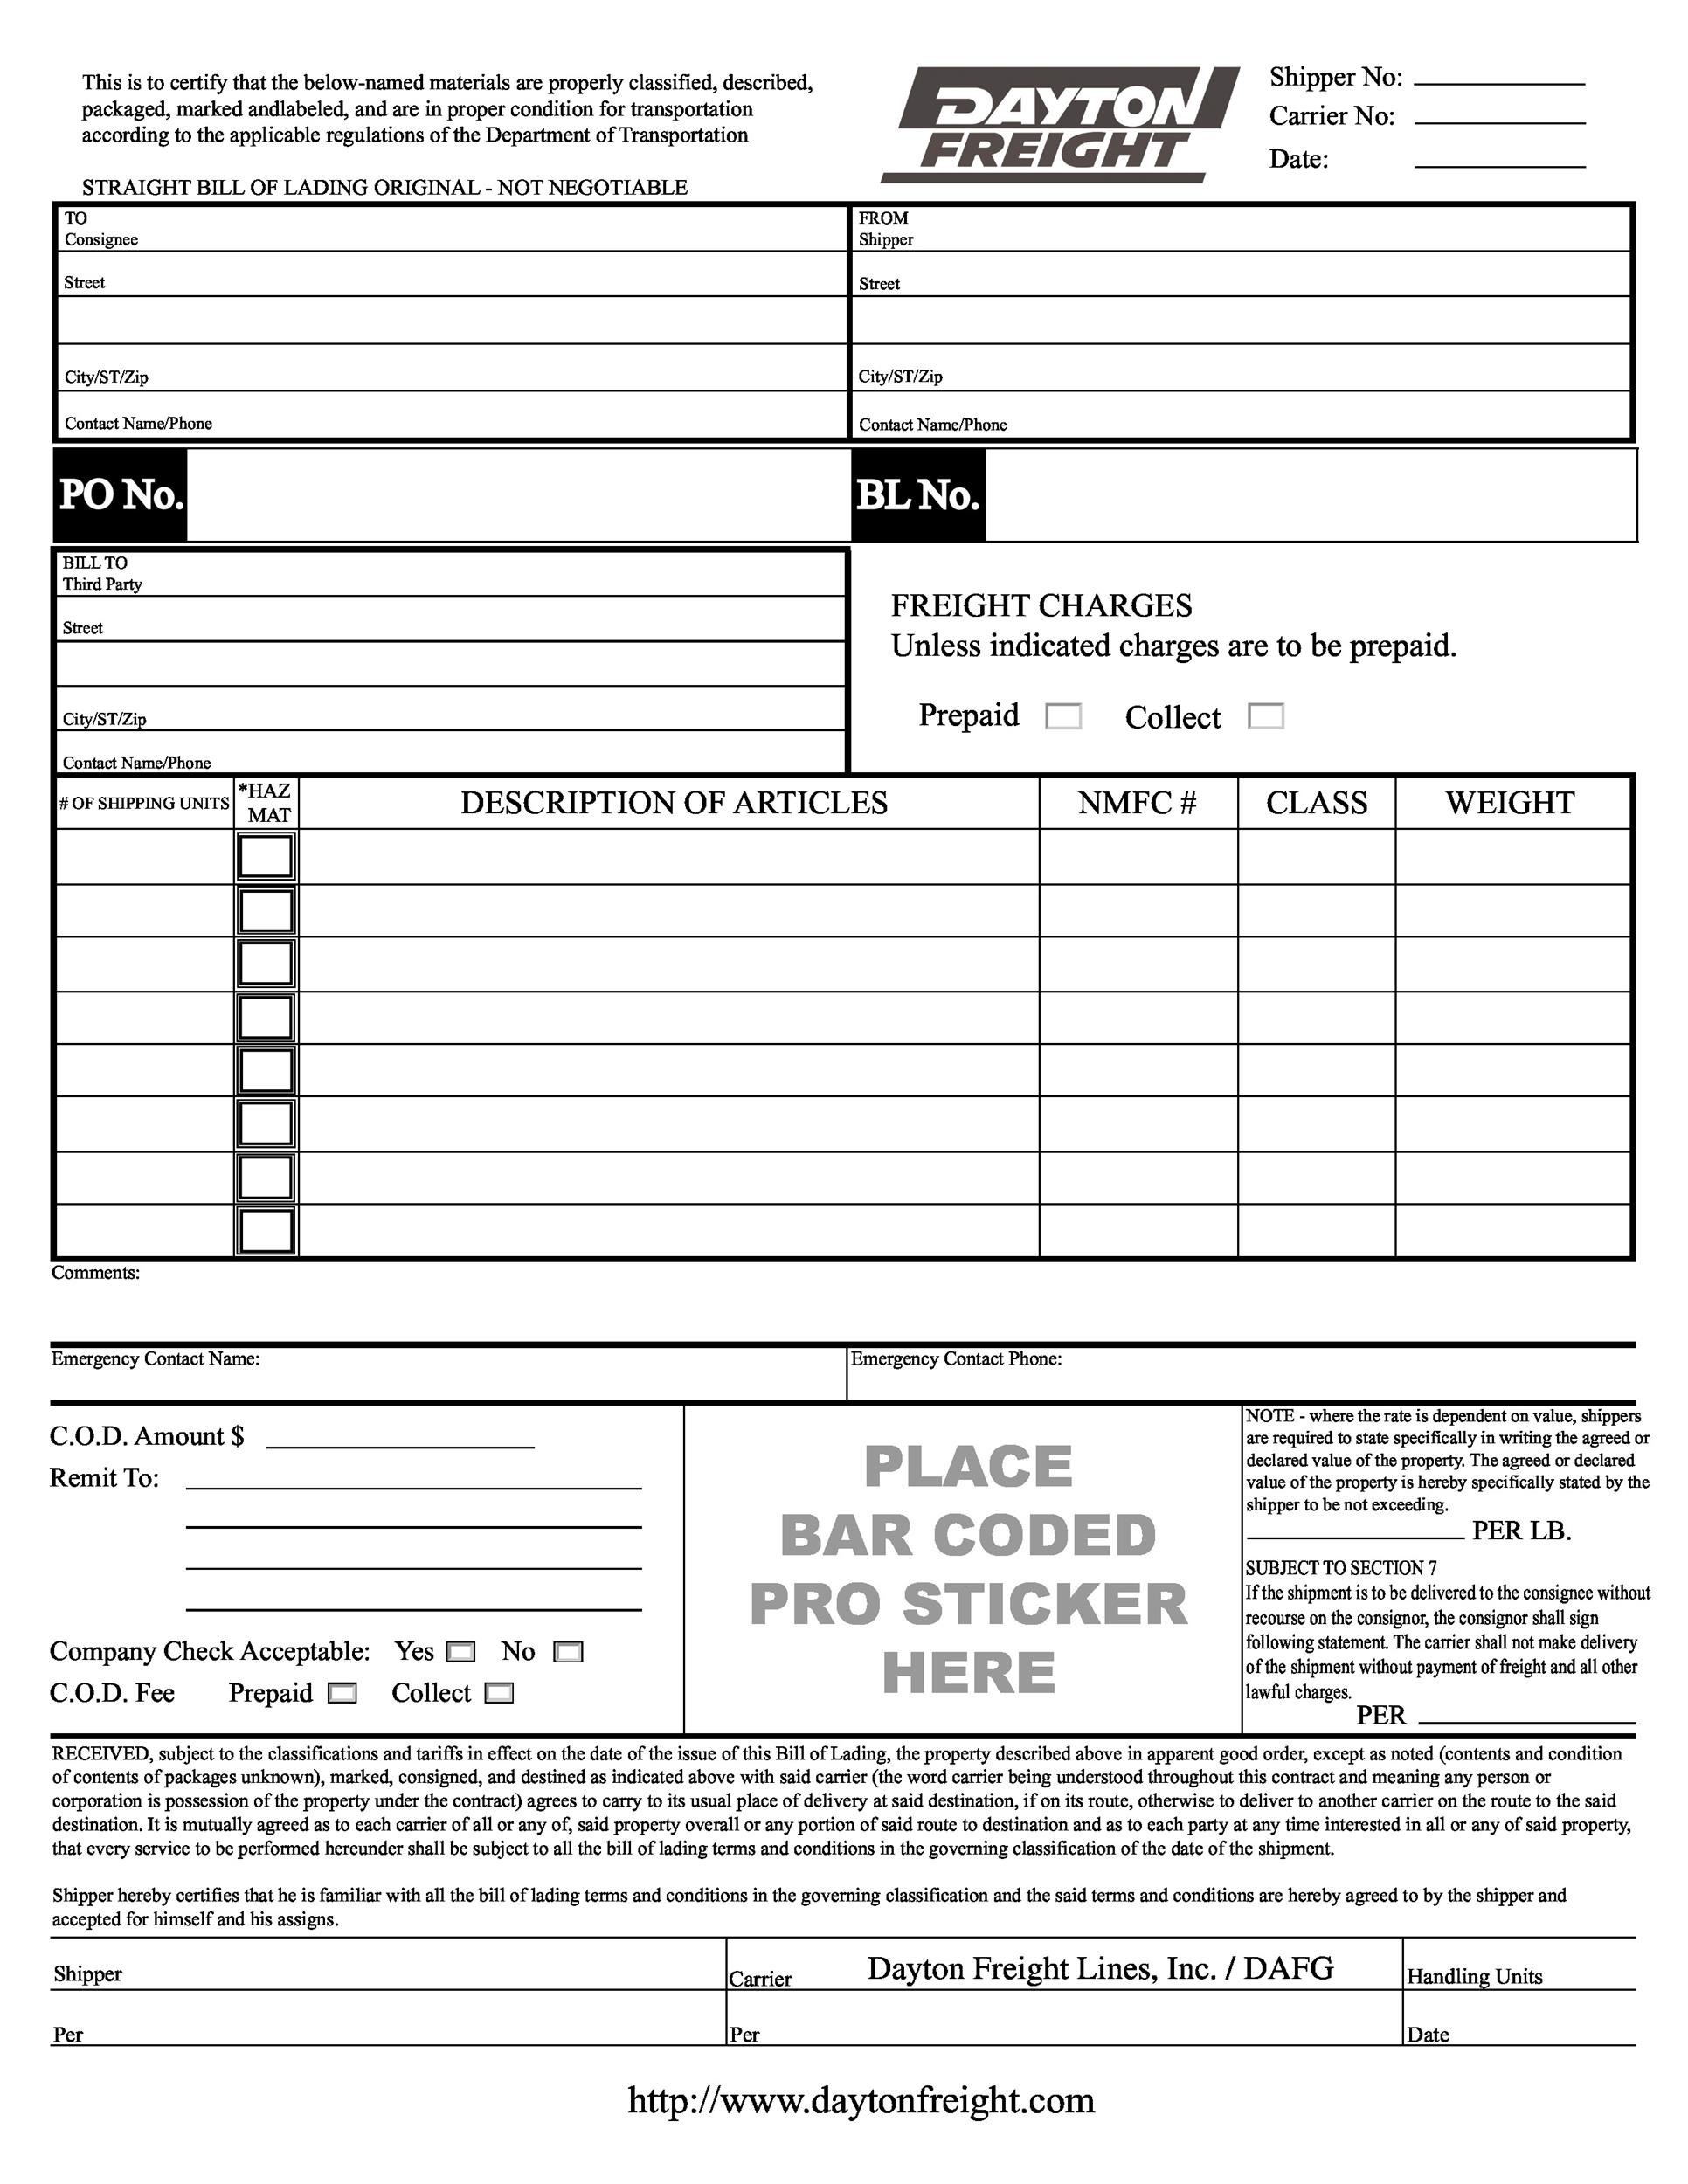 40 Free Bill Of Lading Forms Templates TemplateLab